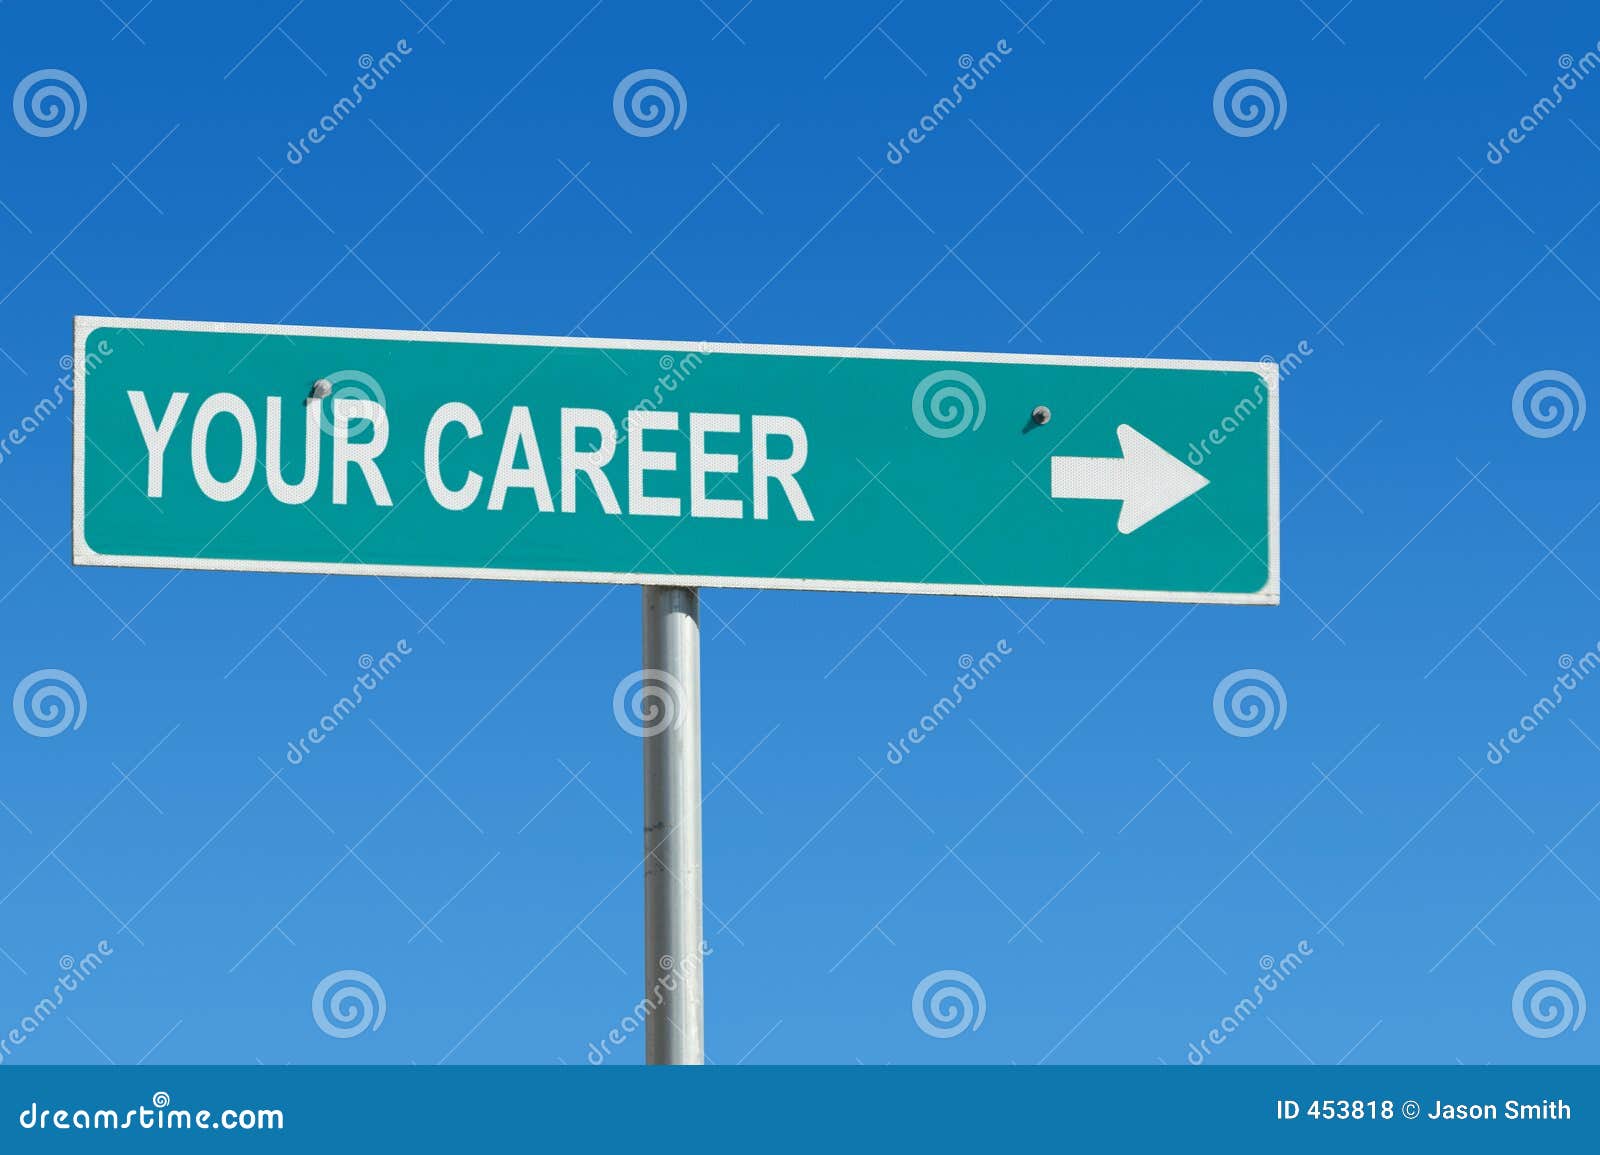 your career